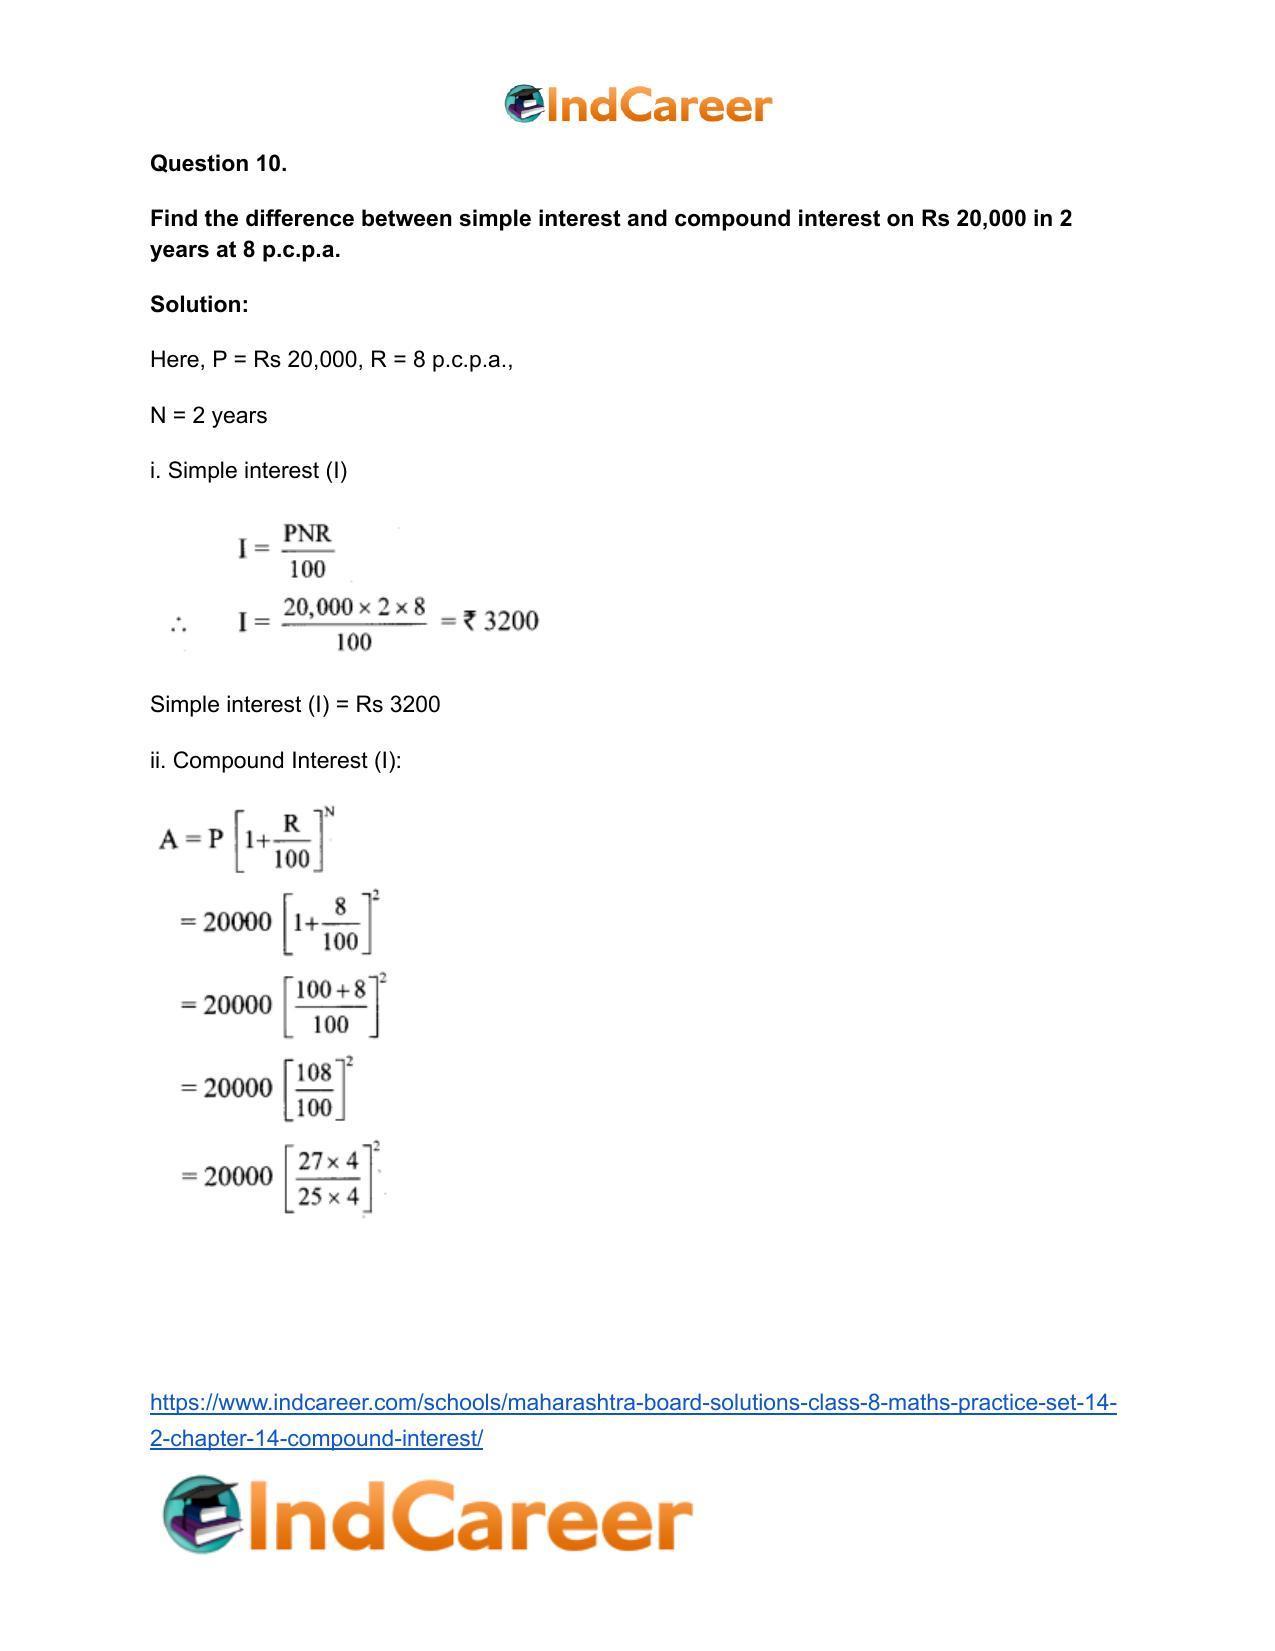 Maharashtra Board Solutions Class 8-Maths (Practice Set 14.2): Chapter 14- Compound Interest - Page 12